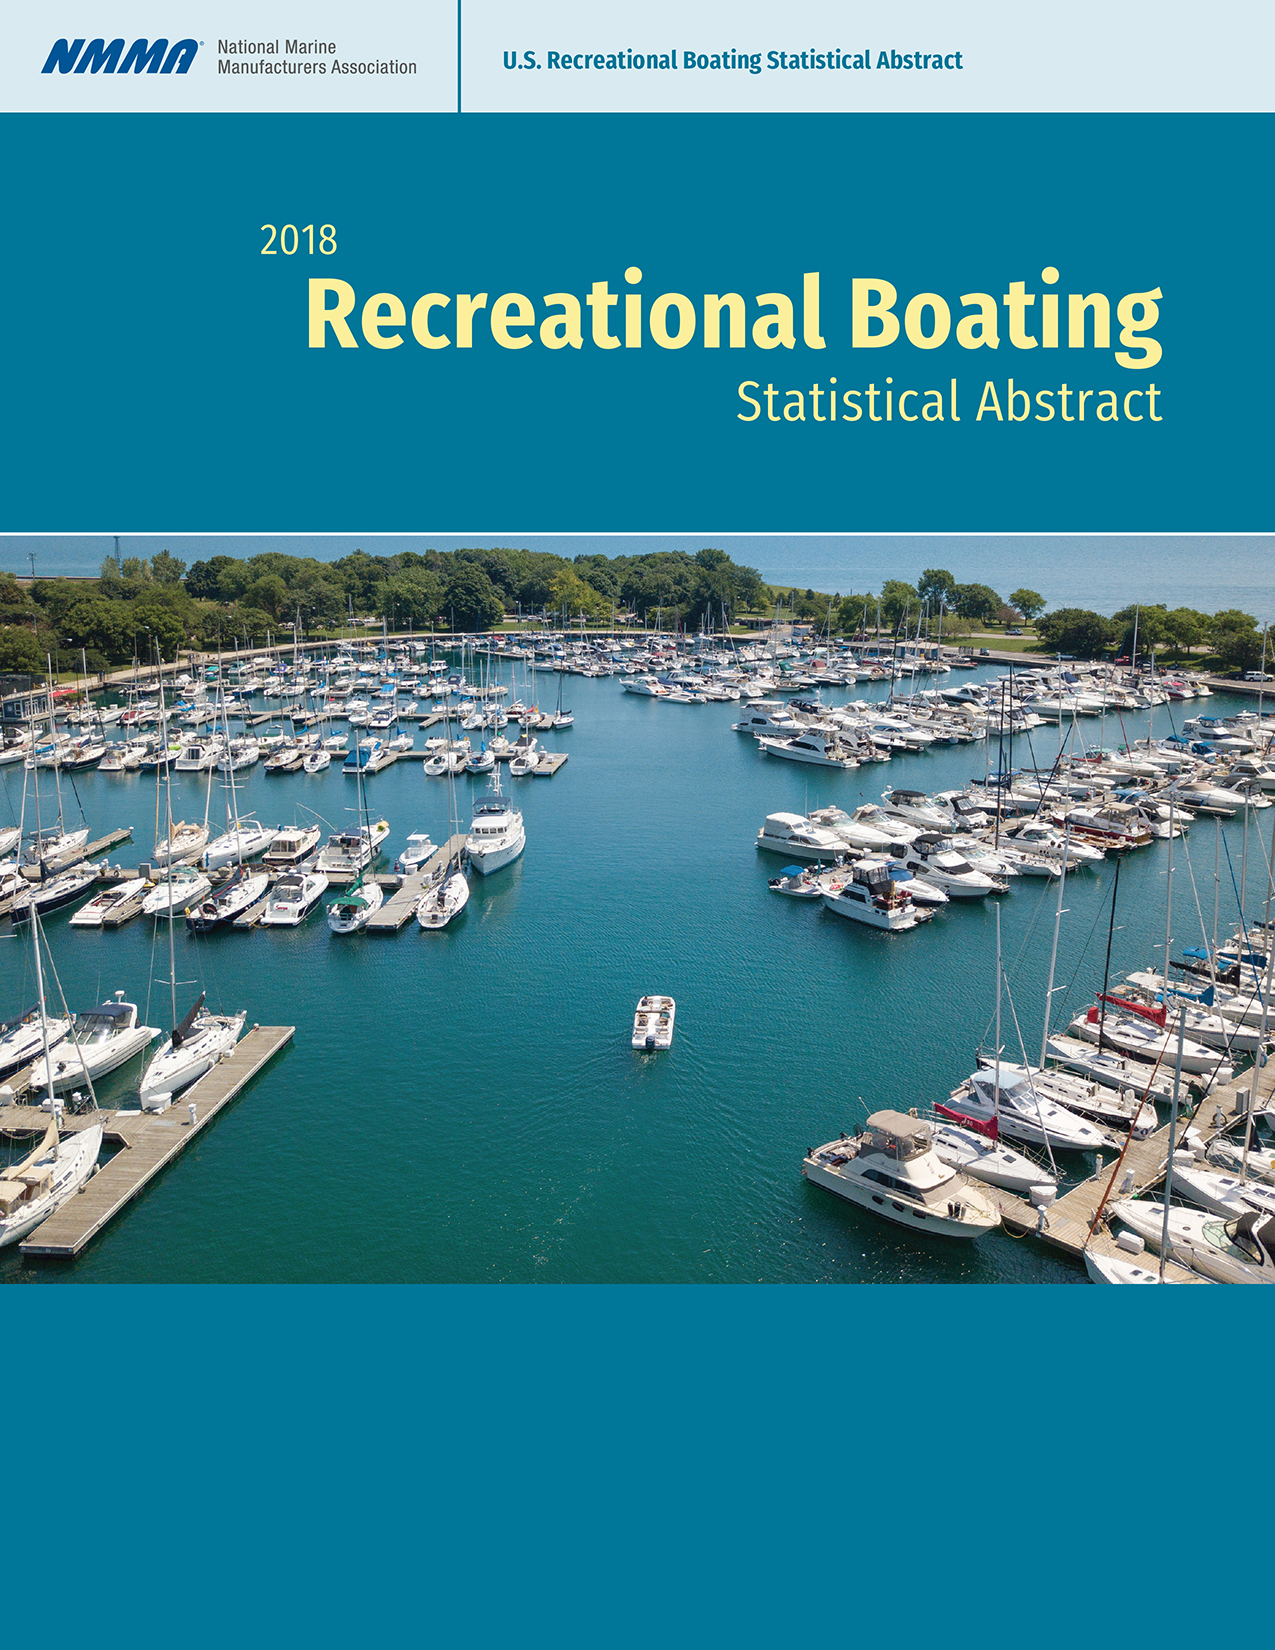 2022 U.S. Recreational Boating Statistical Abstract Full Report